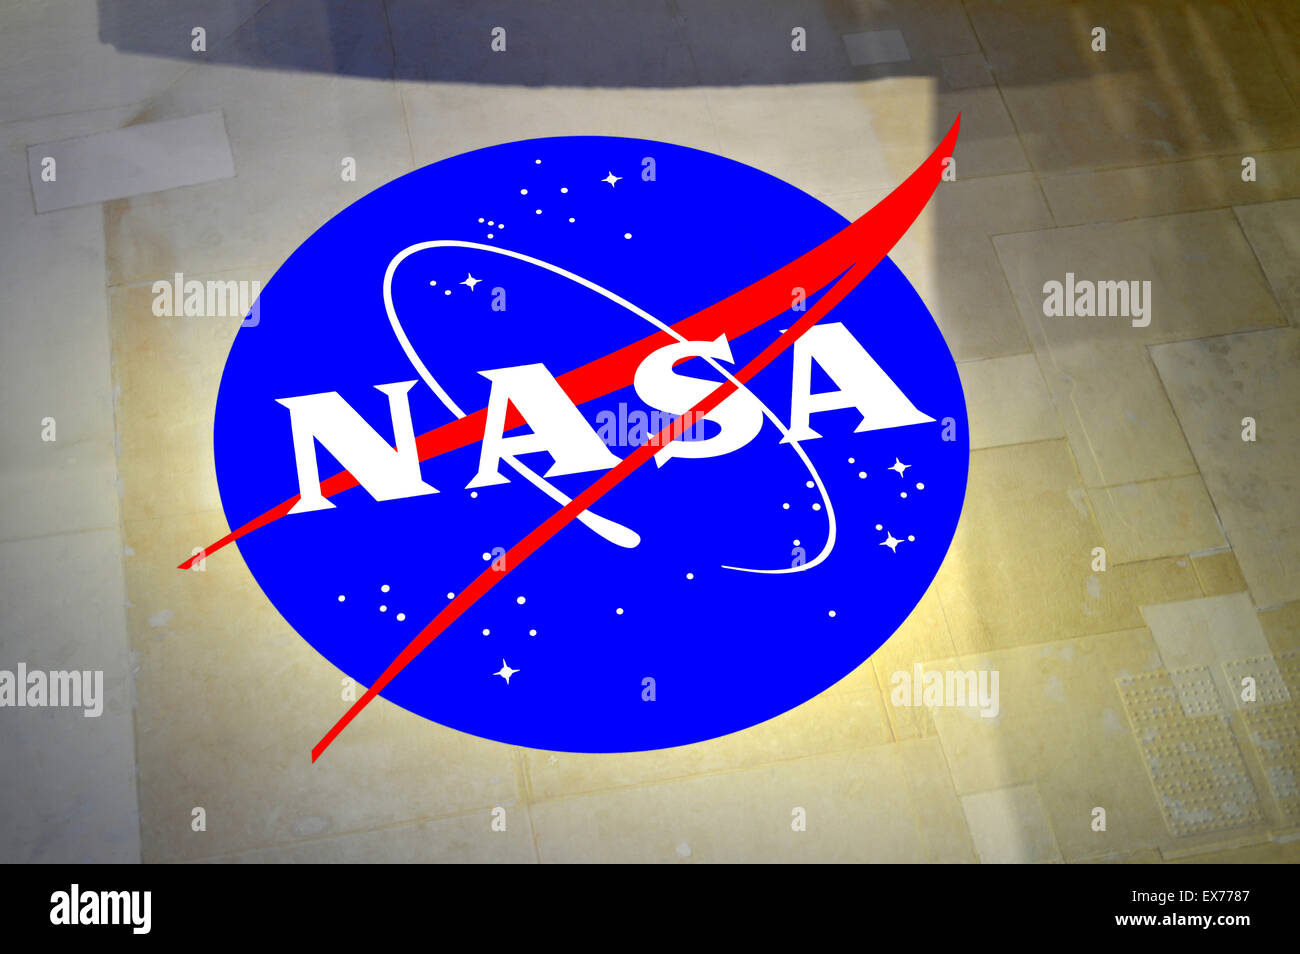 National Aeronautics and Space Administration insignia on the Space Shuttle tiles Stock Photo